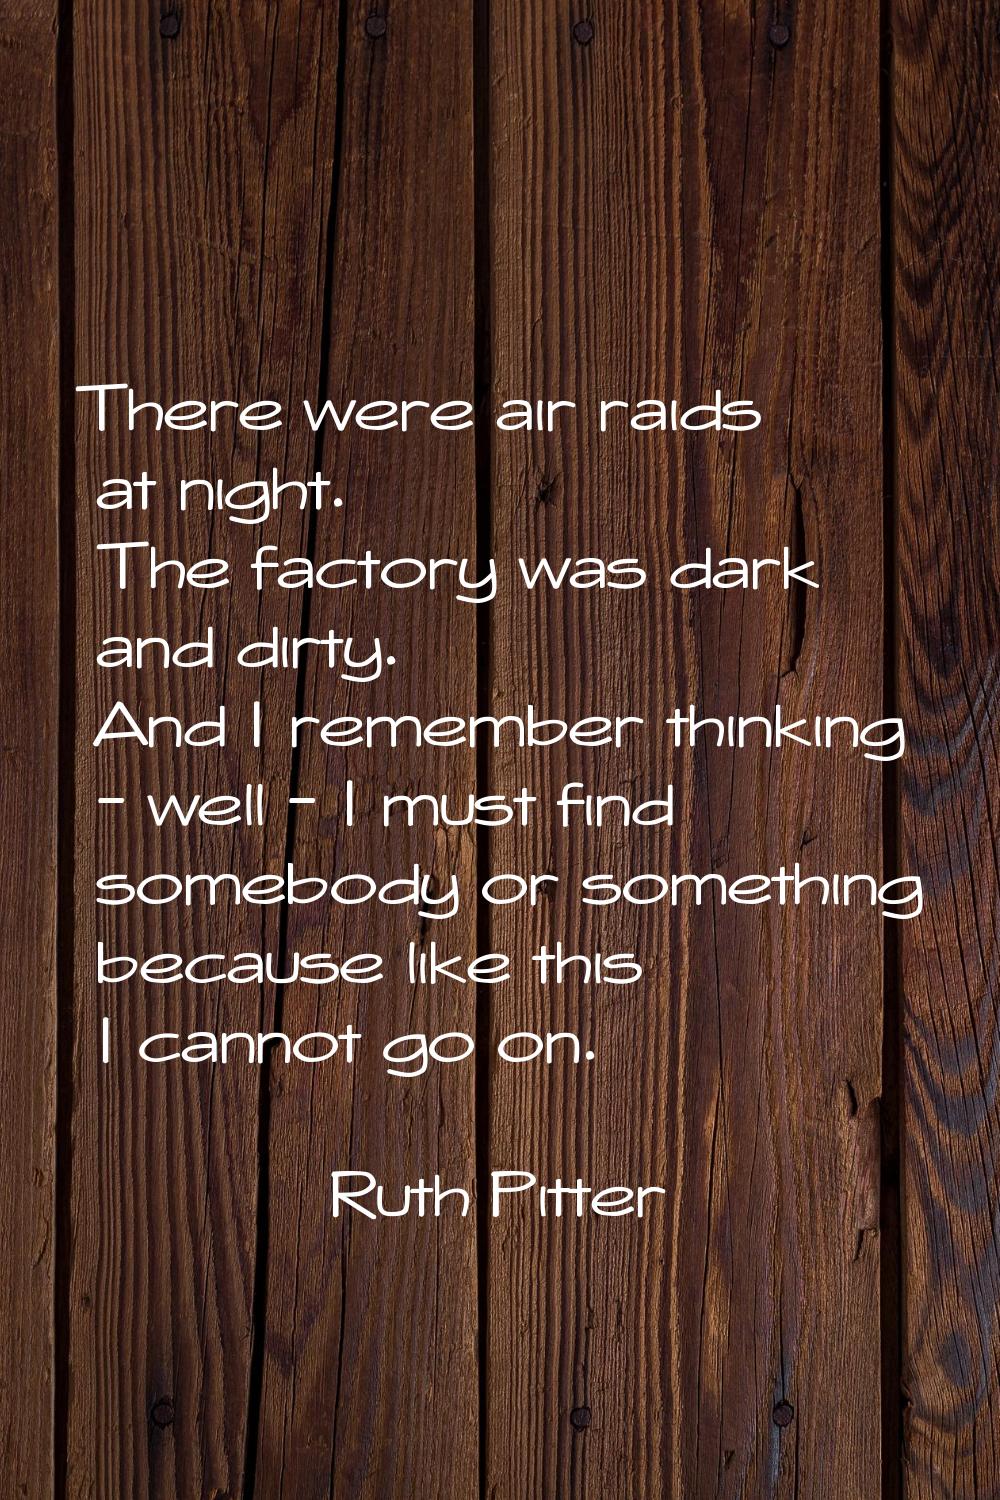 There were air raids at night. The factory was dark and dirty. And I remember thinking - well - I m